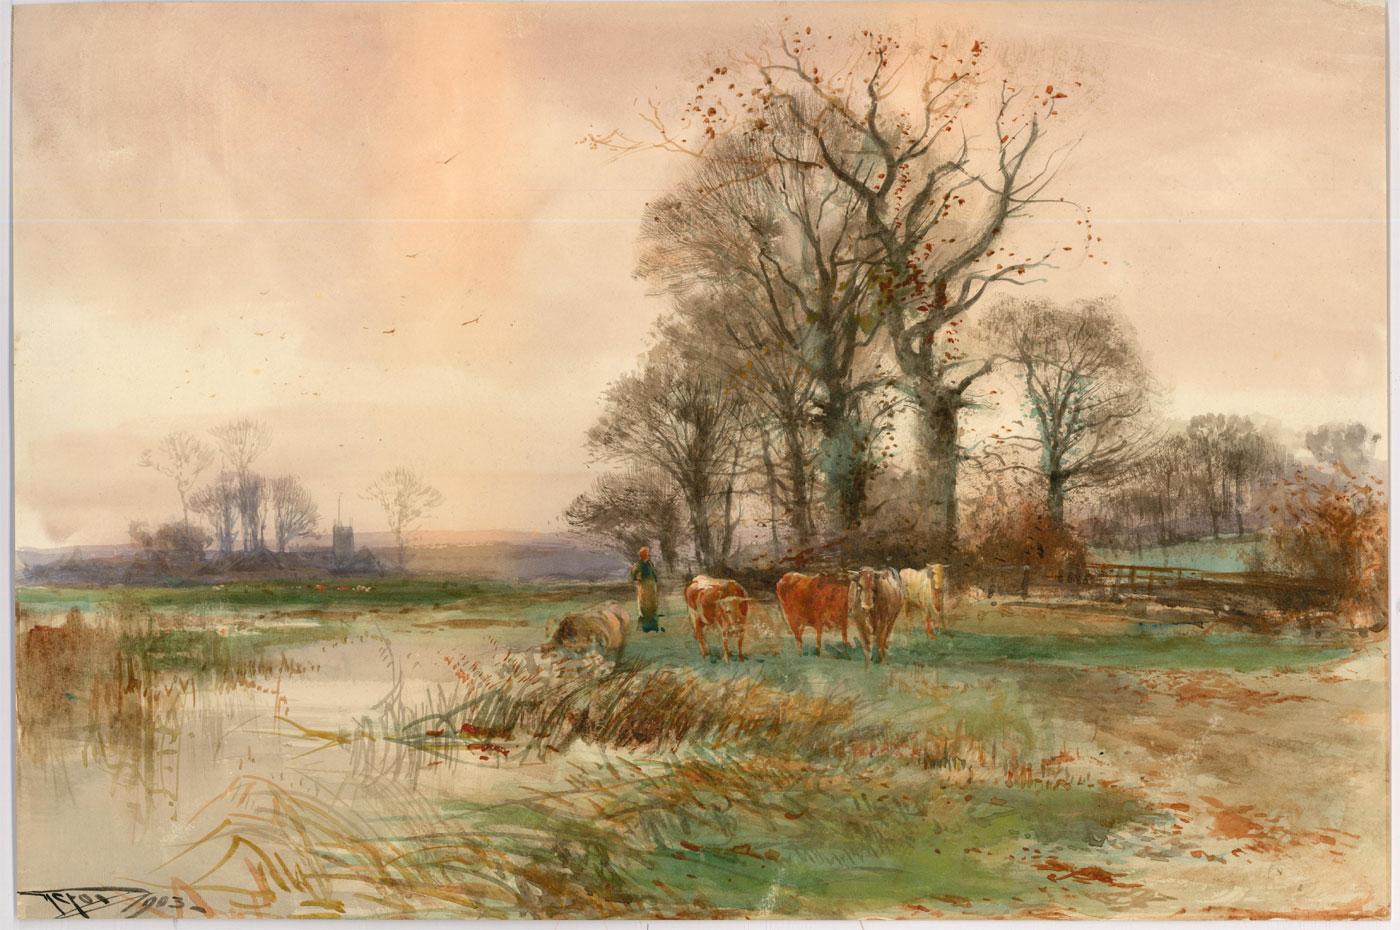 Henry Charles Fox (1860-1929) - 1903 Watercolour, Roxton on the Ouse 1